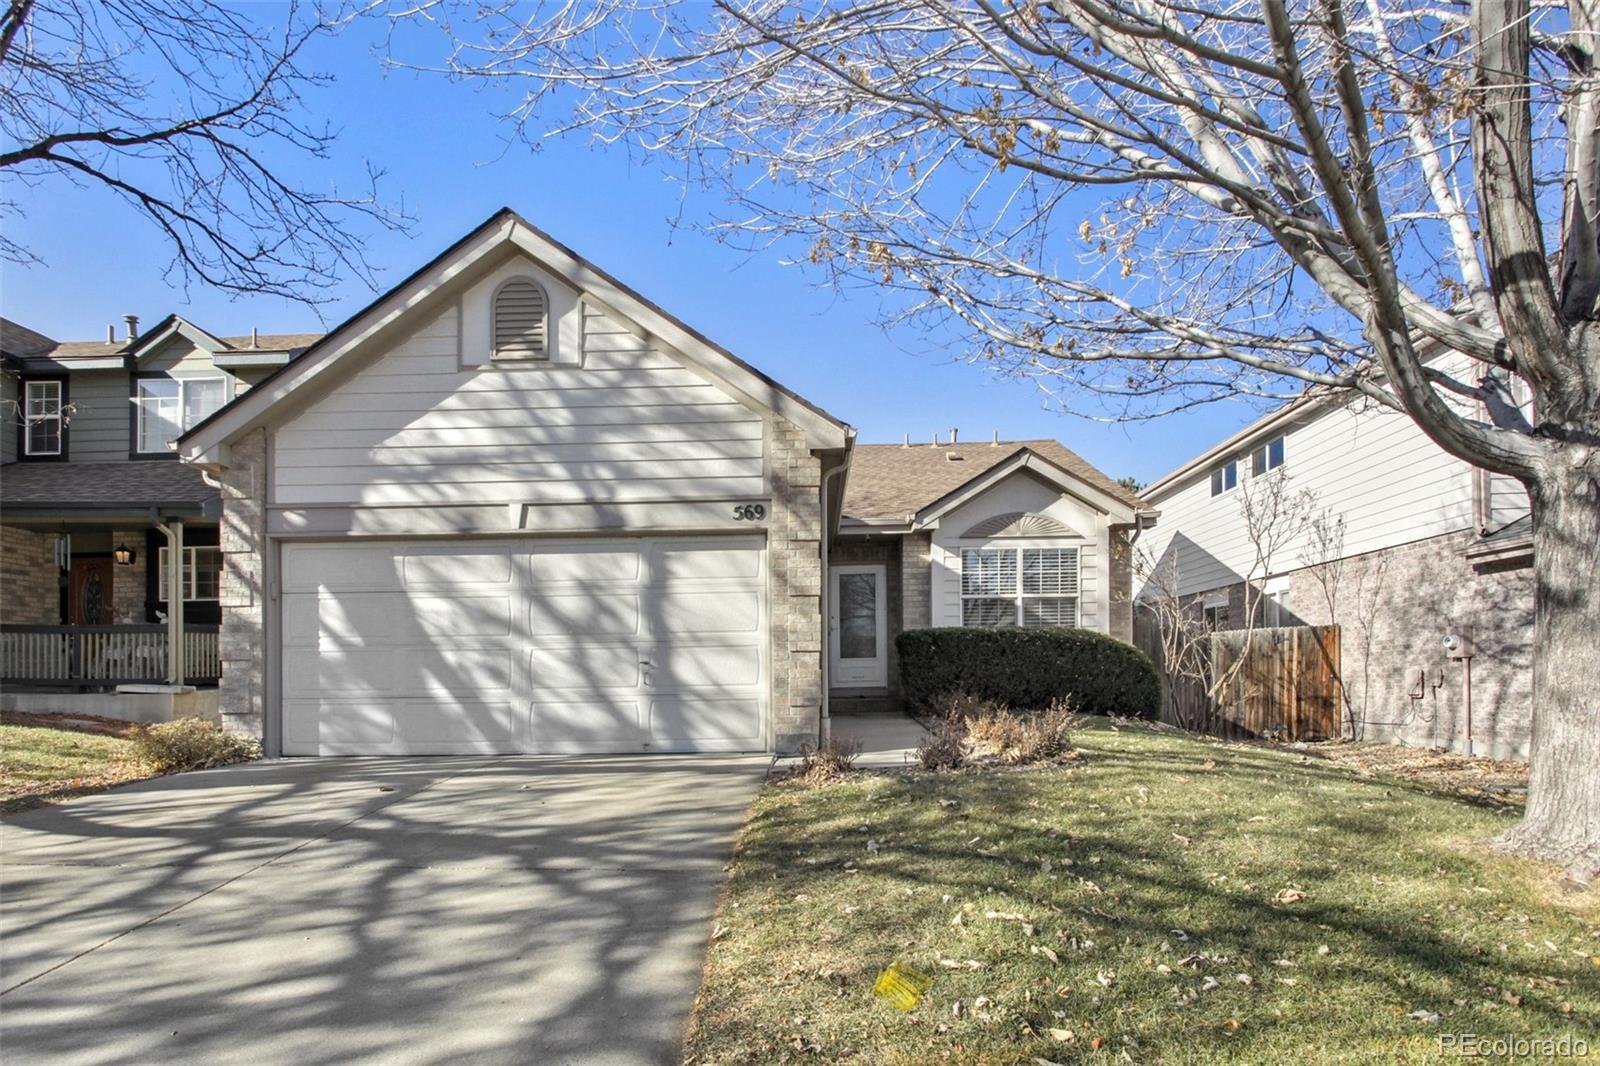 569 w 116th way, Northglenn sold home. Closed on 2023-12-27 for $470,000.